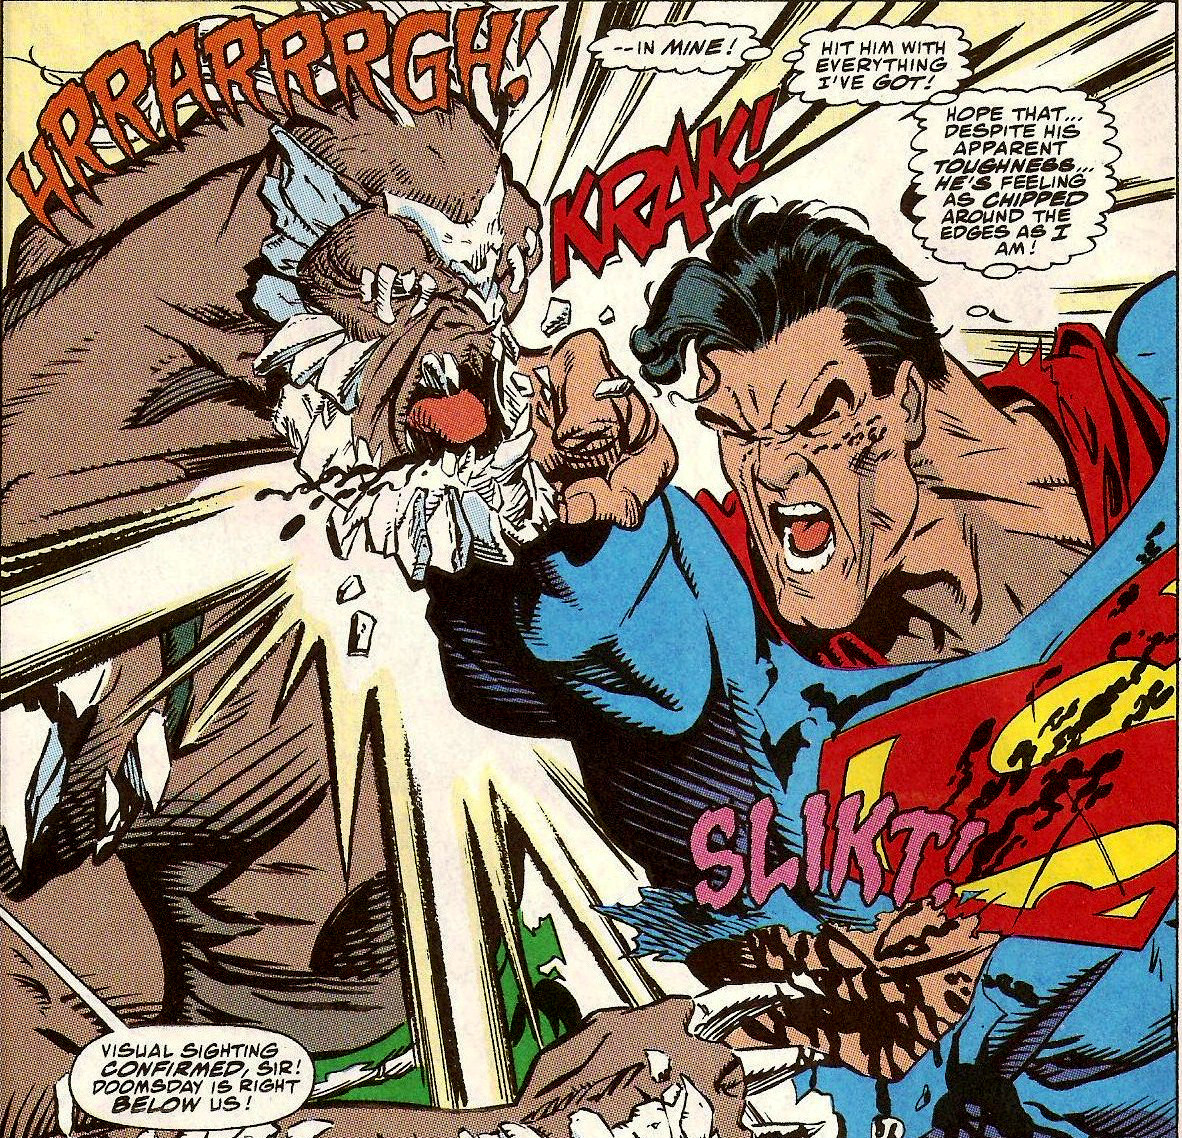 From Superman: The Man of Steel #19 (1993)